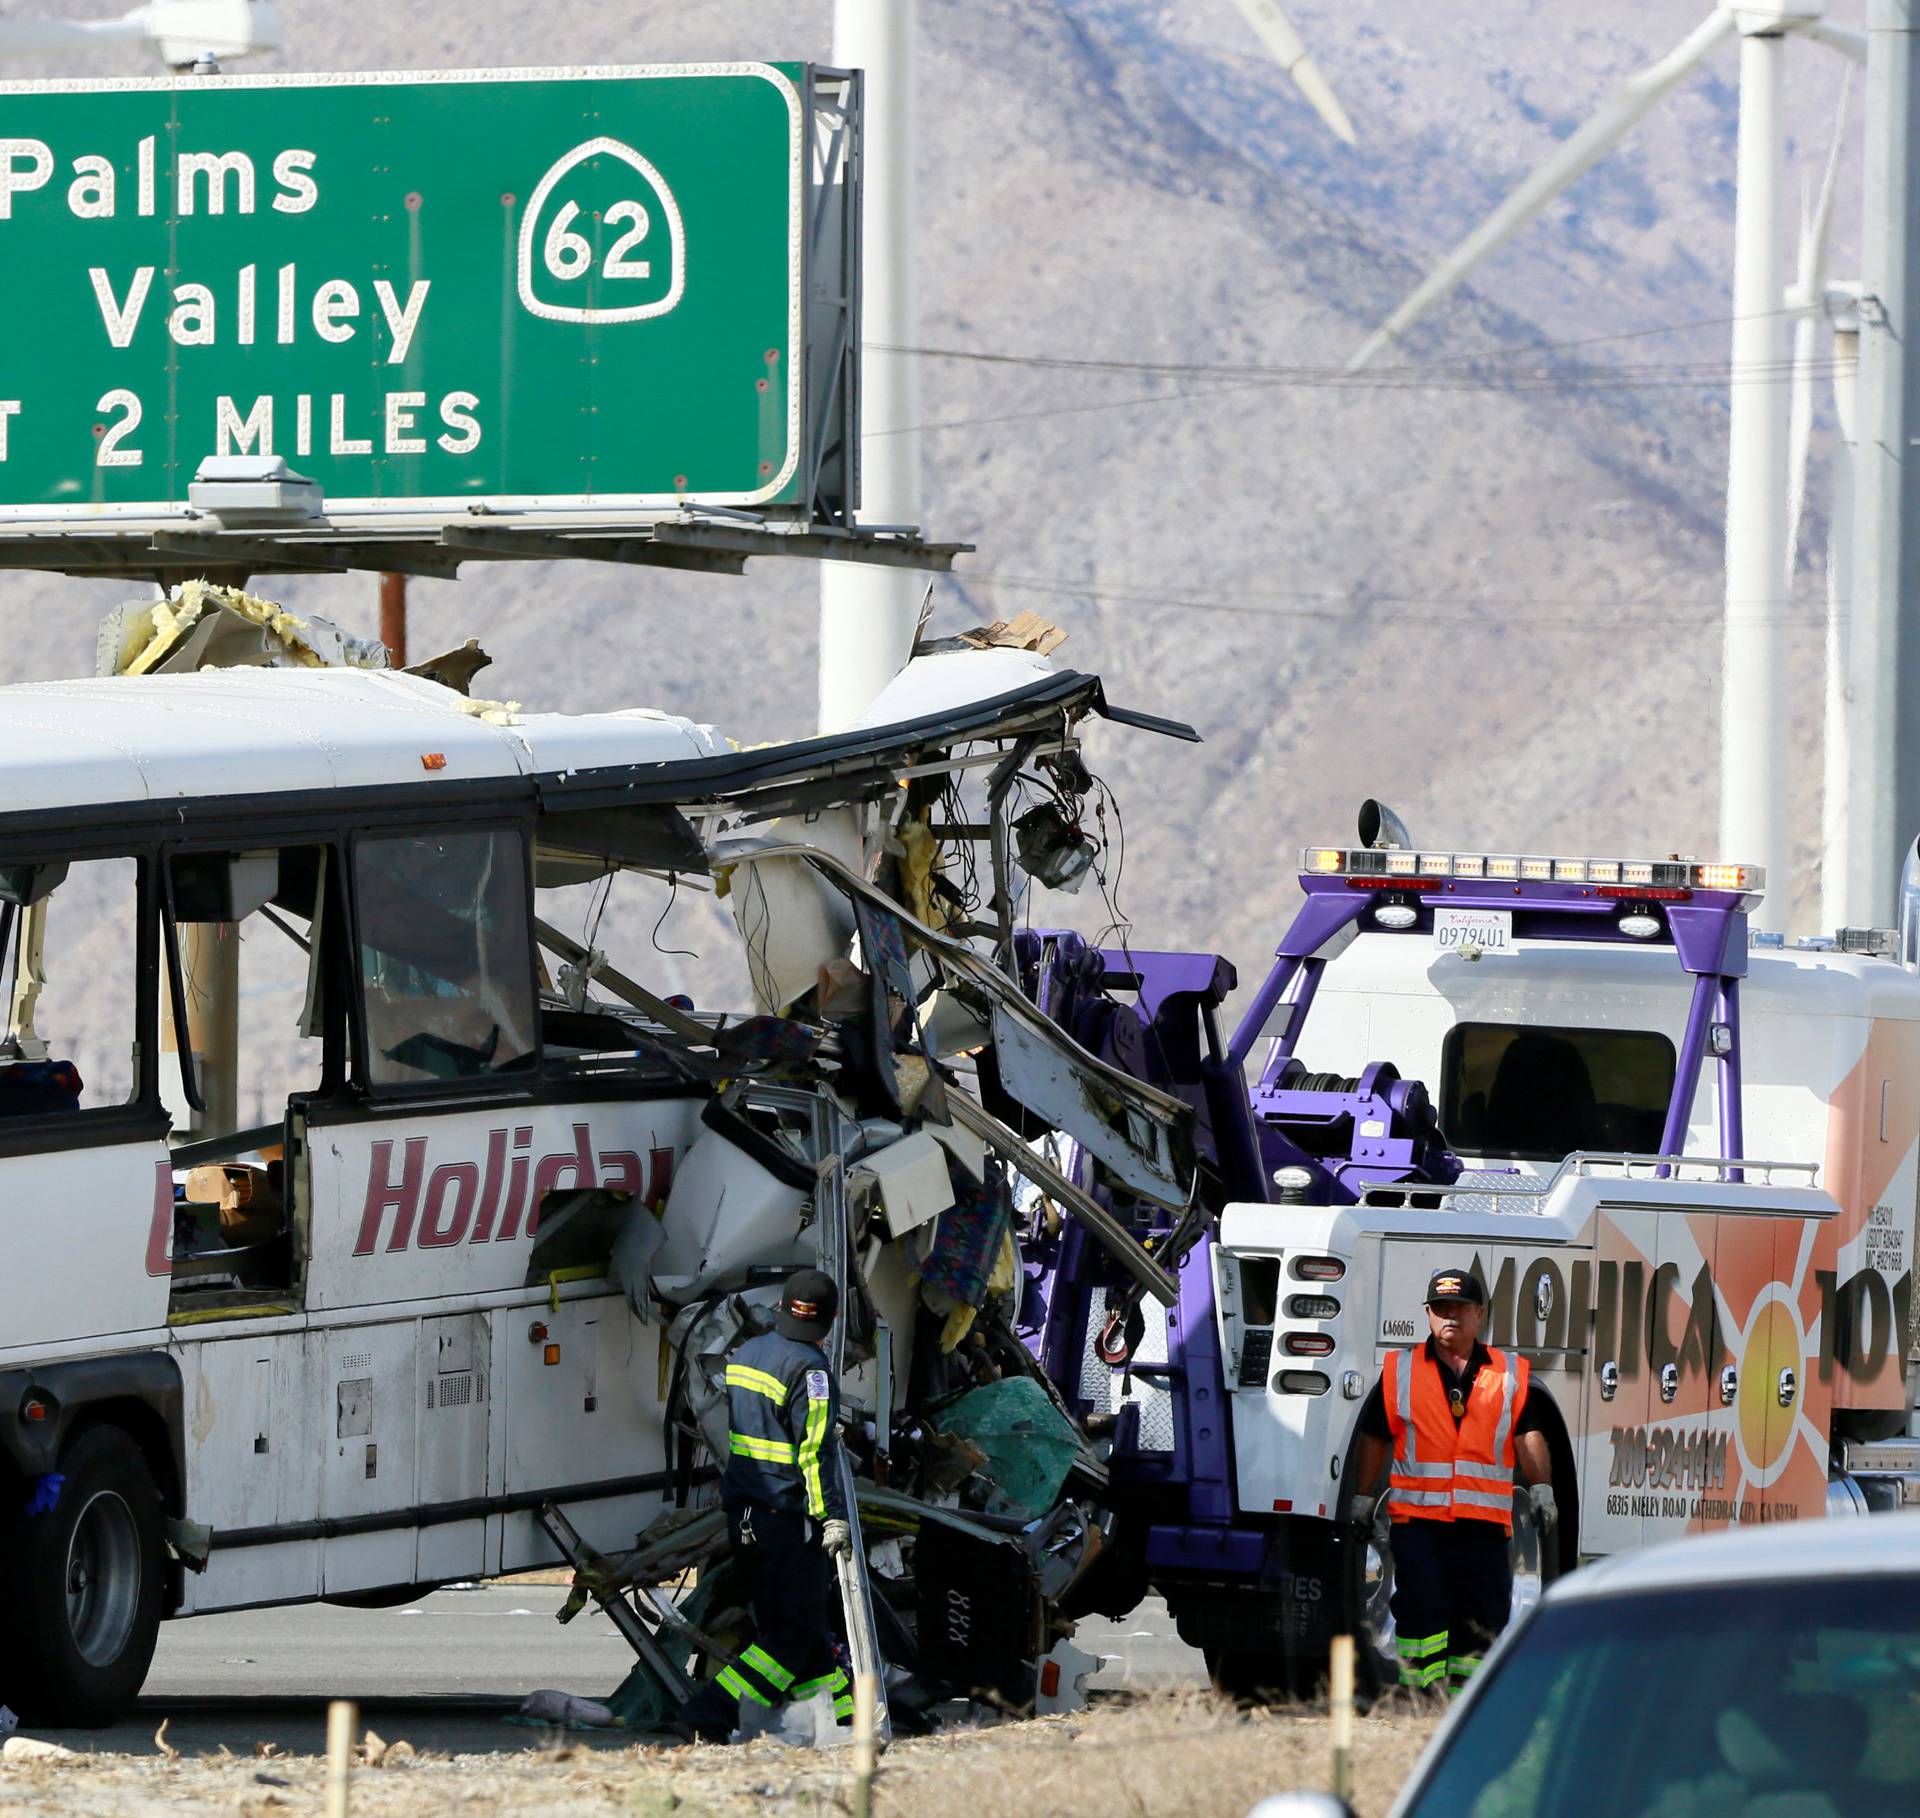 A mangled bus from the Holiday Bus Lines is seen after being towed from the scene of a mass casualty crash on the westbound Interstate 10 freeway near Palm Springs, California